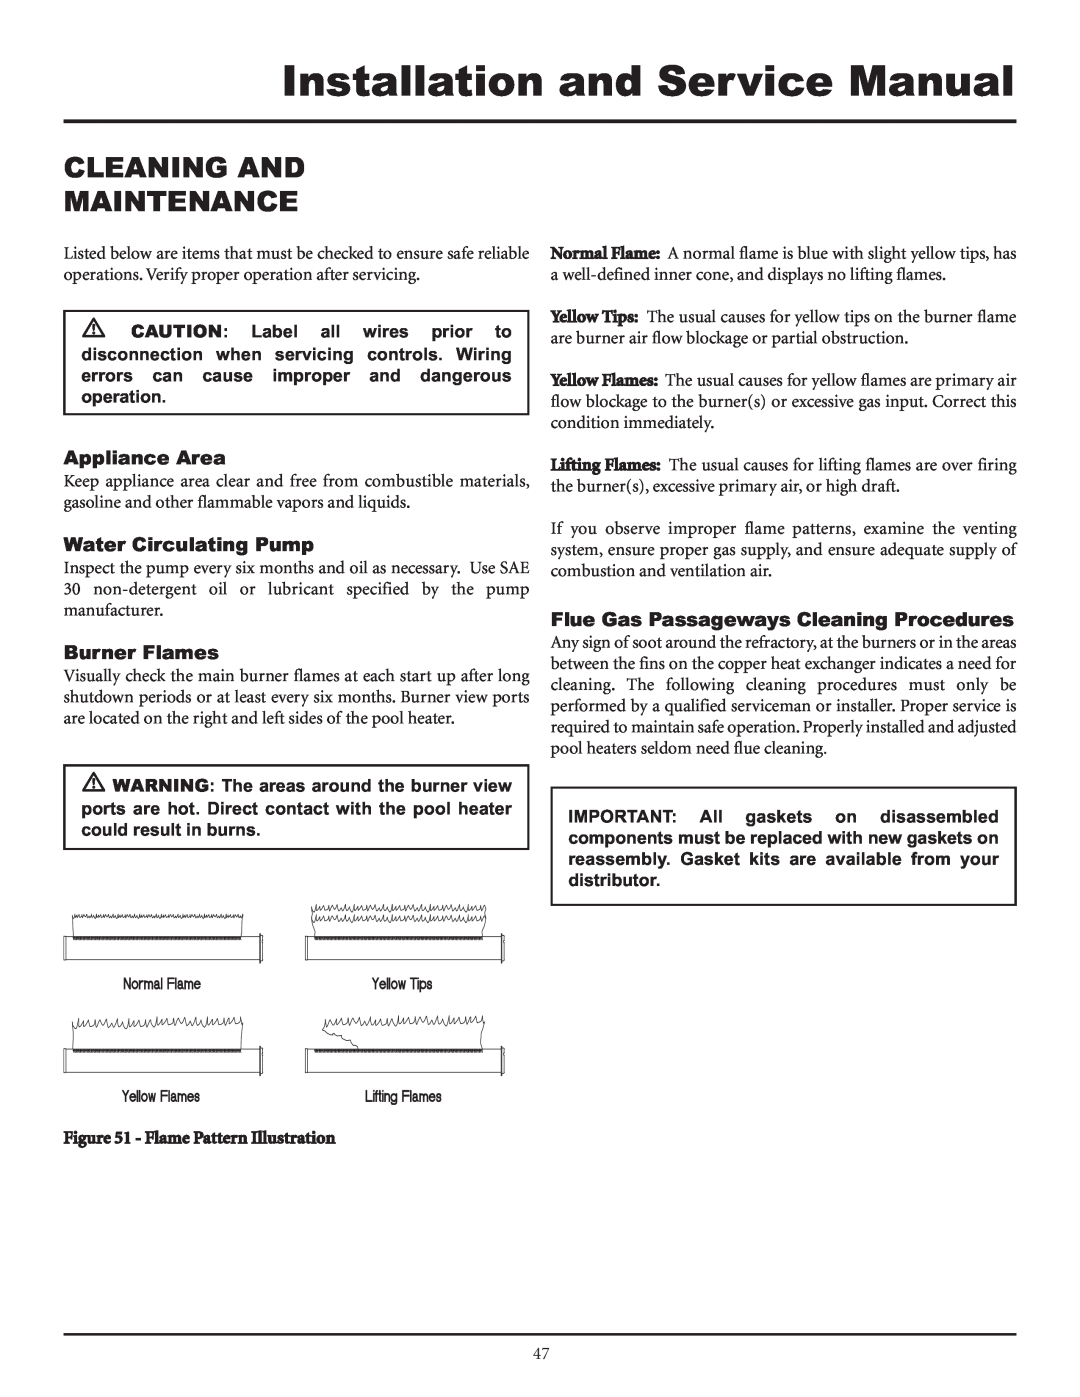 Lochinvar F0600187510 service manual Cleaning And Maintenance, Appliance Area, Water Circulating Pump, Burner Flames 